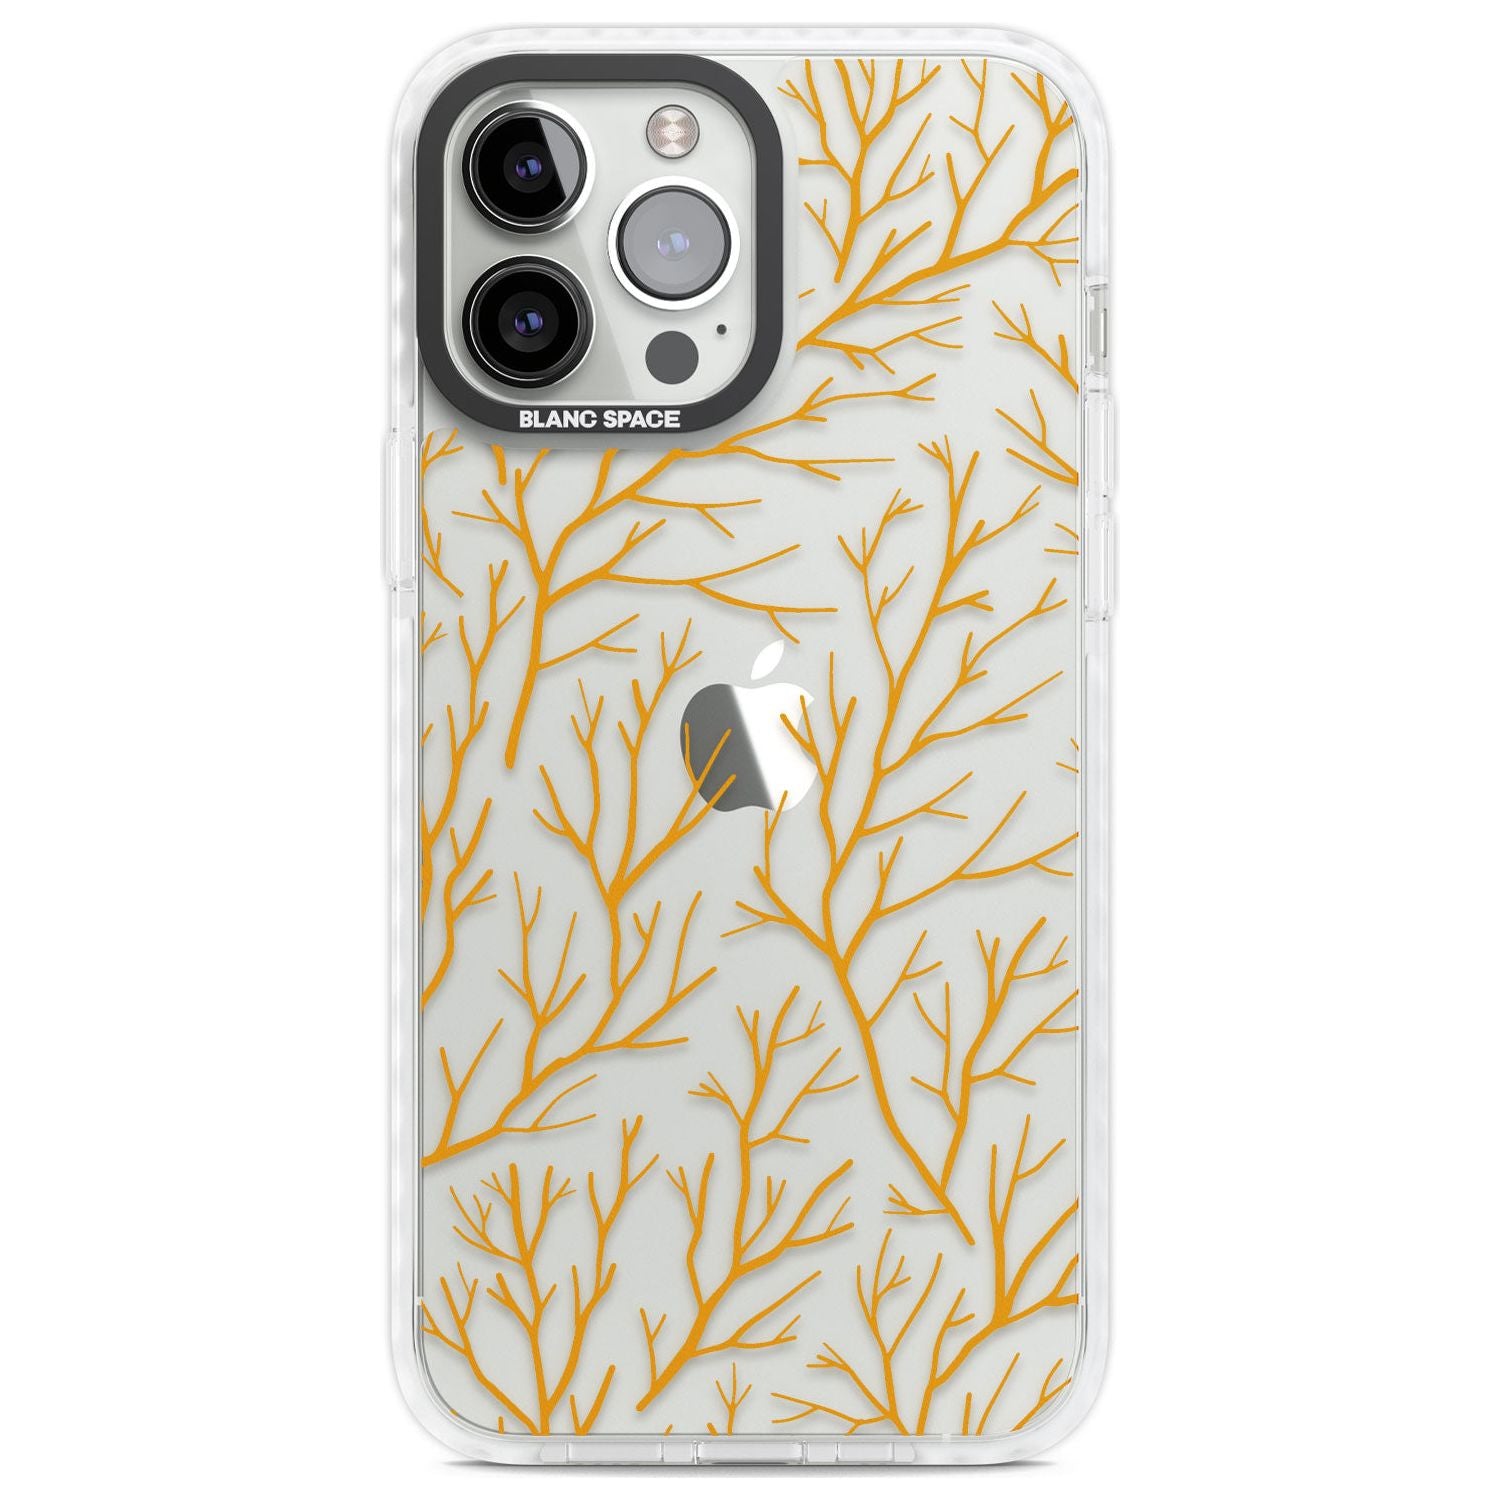 Personalised Bramble Branches Pattern Custom Phone Case iPhone 13 Pro Max / Impact Case,iPhone 14 Pro Max / Impact Case Blanc Space